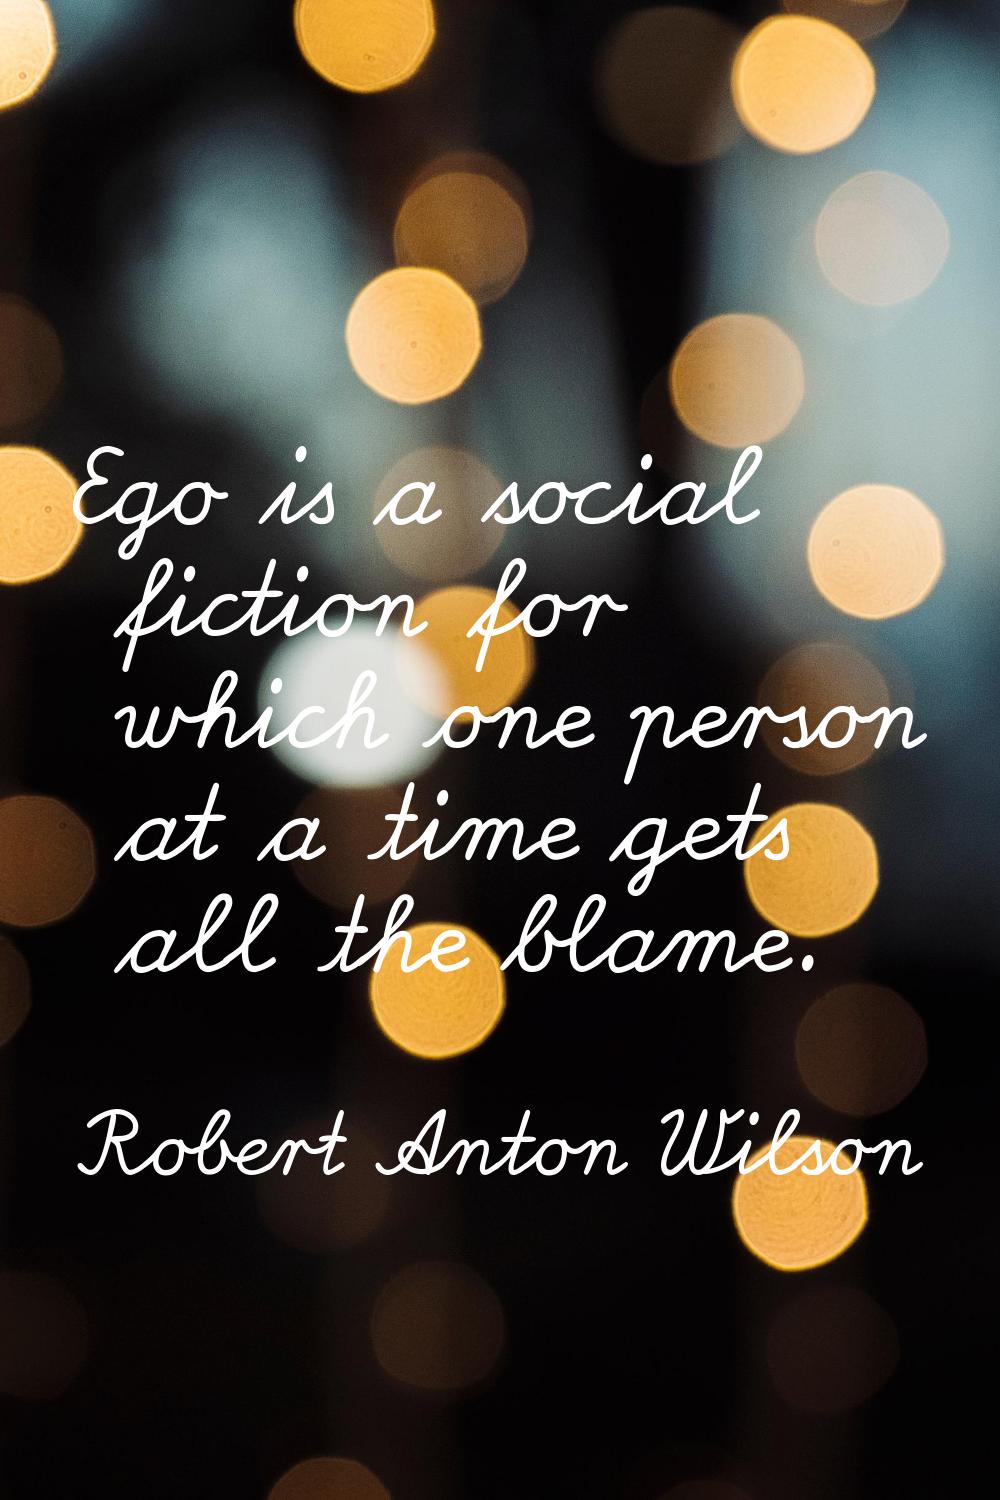 Ego is a social fiction for which one person at a time gets all the blame.